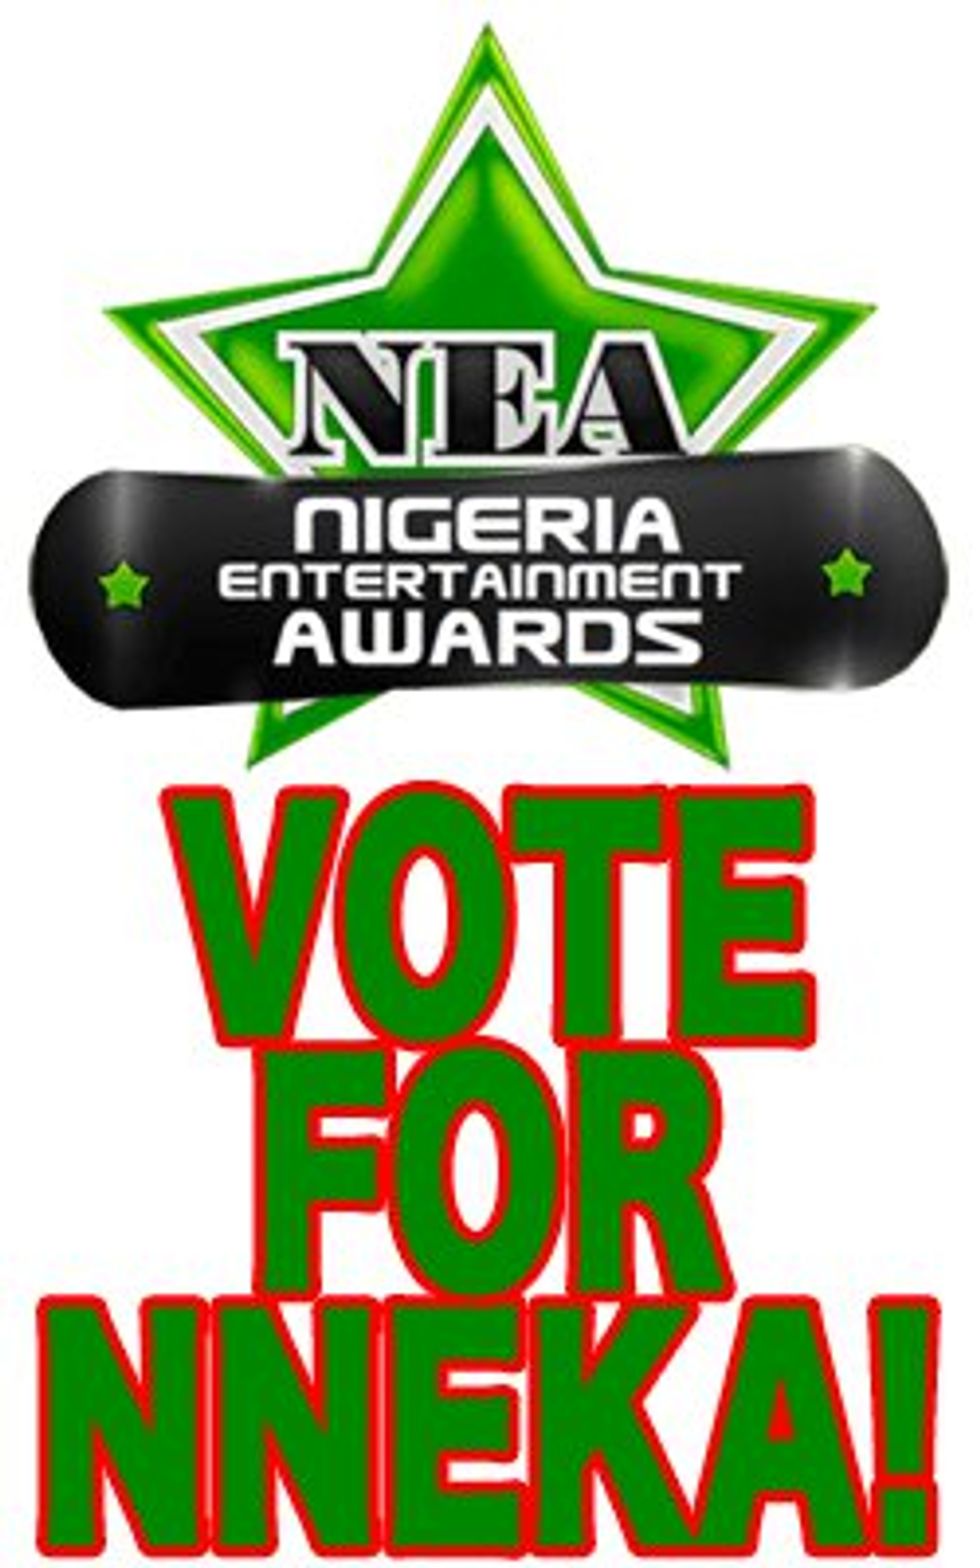 Nneka Nominated for the 5th Annual Nigerian Entertainment Awards